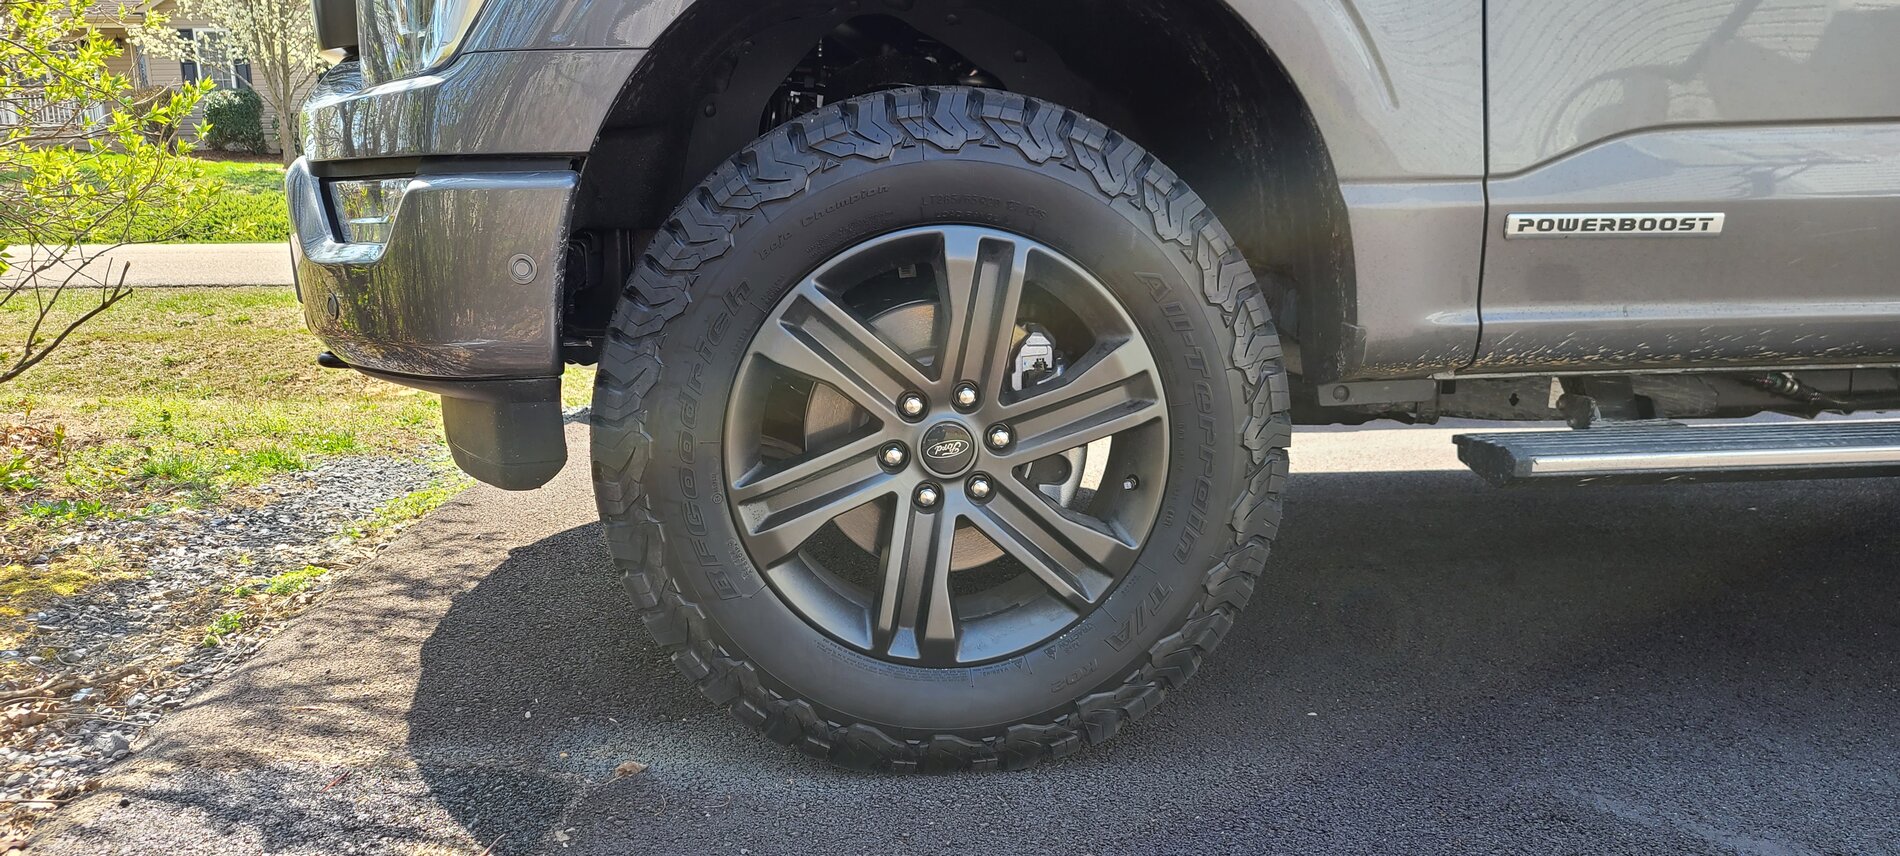 Ford F-150 Lariat Sport 502A, 2" Level, 285/65 R20 KO2s + Mods 20210405_125410